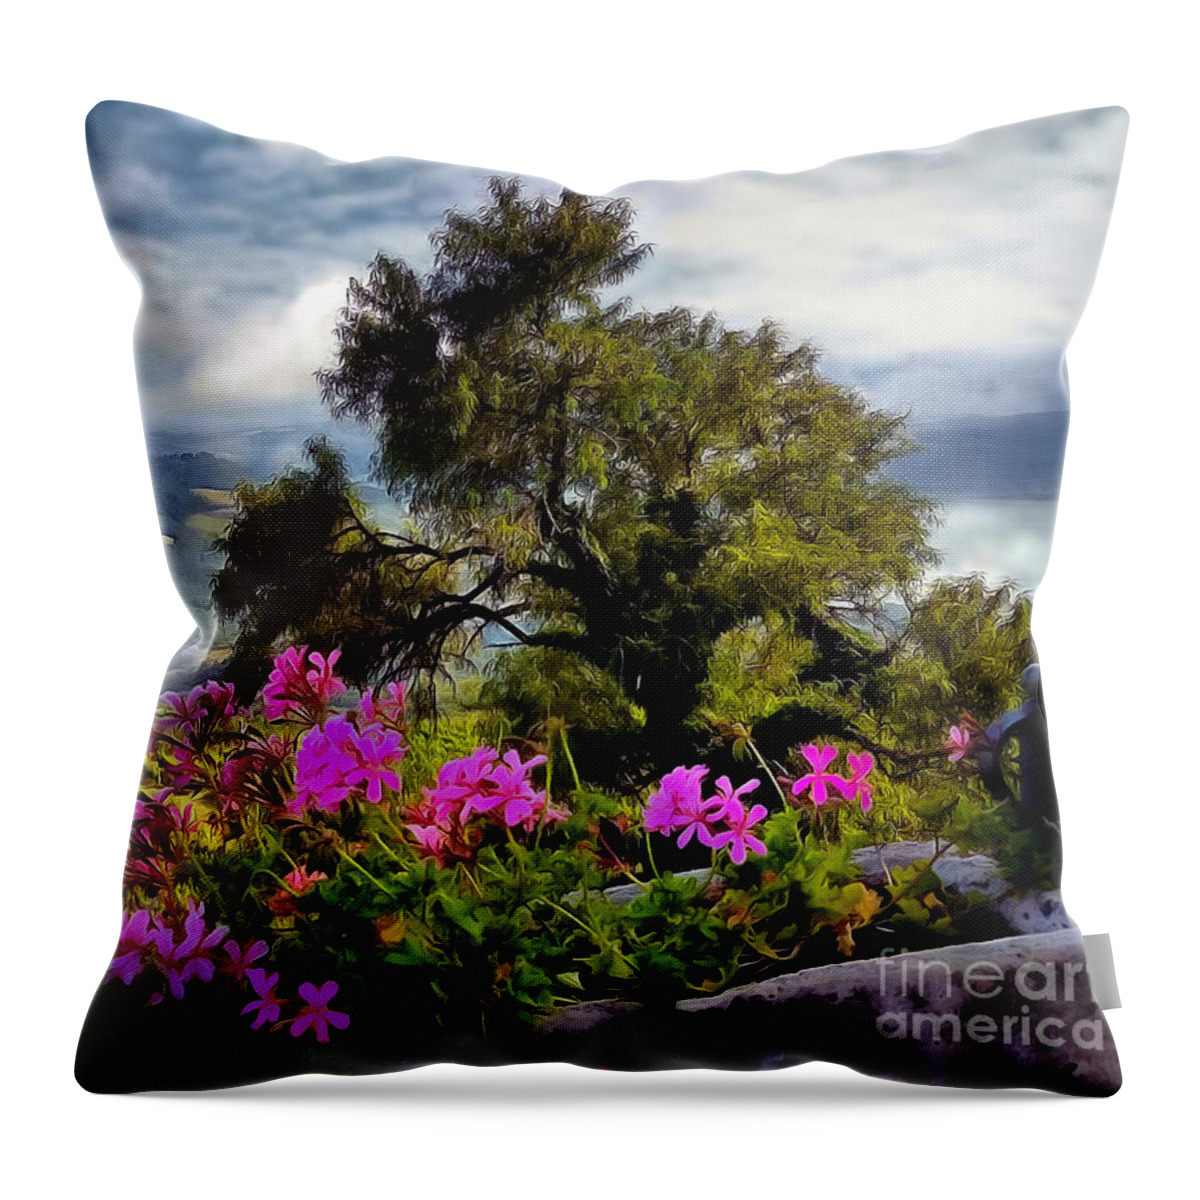 Umbria Throw Pillow featuring the photograph Flower Box Over Umbria by Sea Change Vibes